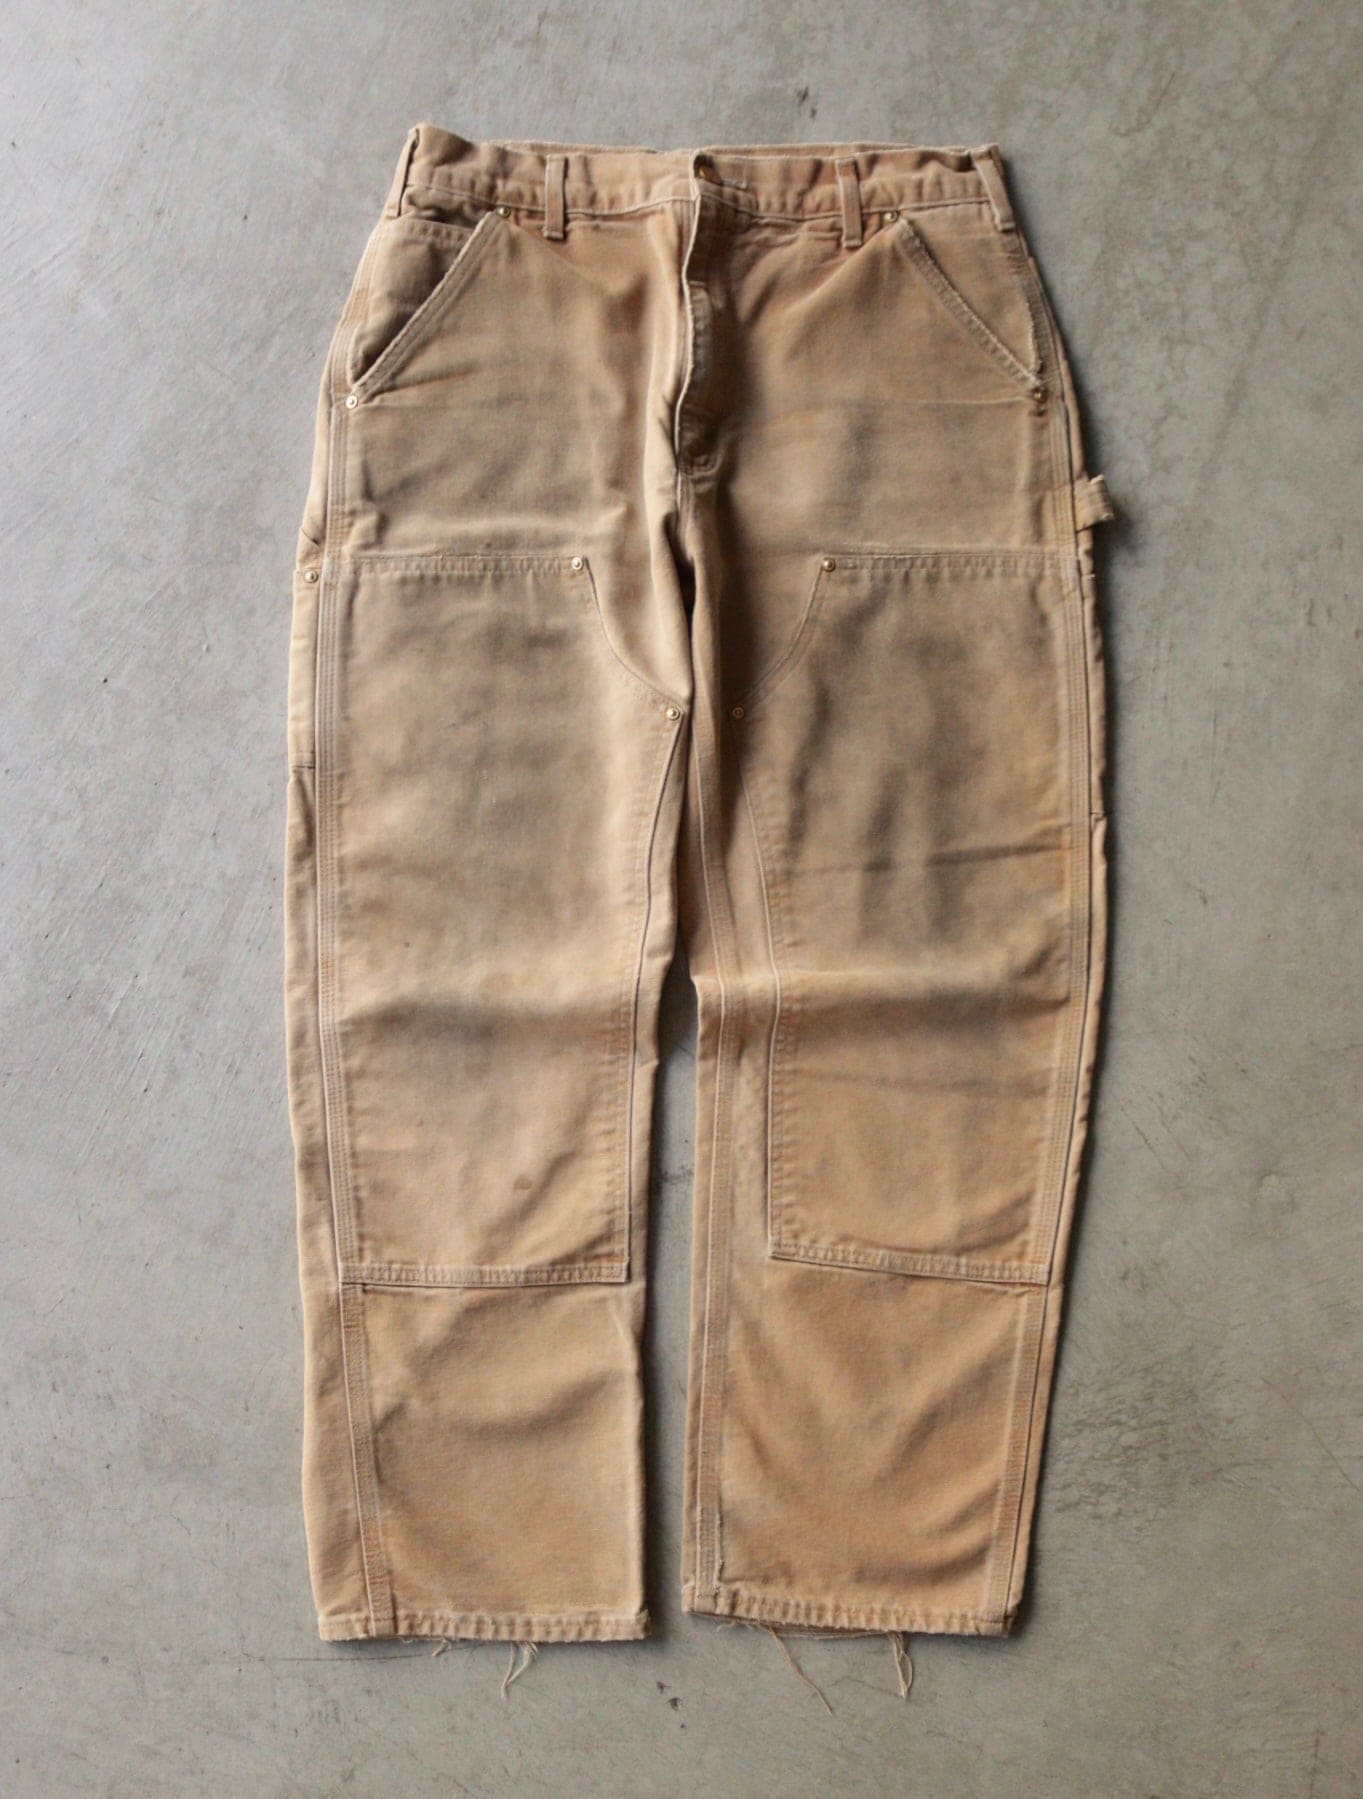 CARHARTT DIRTY STAINED DOUBLE KNEE WORK PANTS